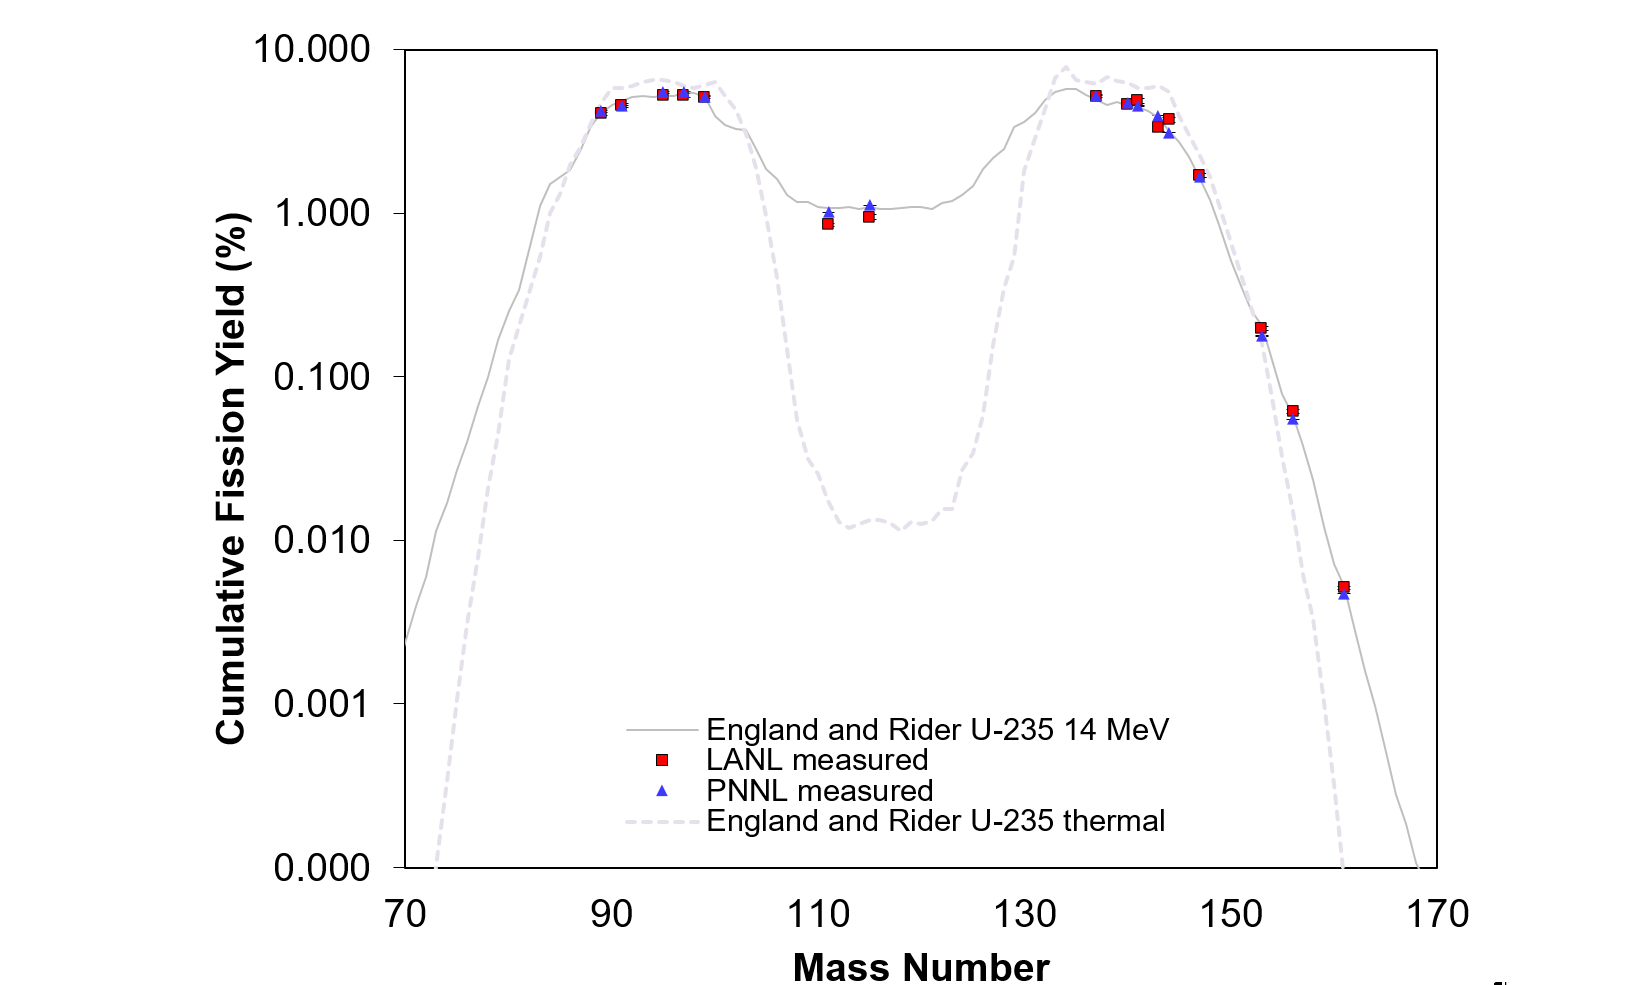 The graph shows fission product distributions measured for U-235 irradiated at the PNNL D-T generator (14 MeV spectrum). All yields are calculated relative to Mo-99. 